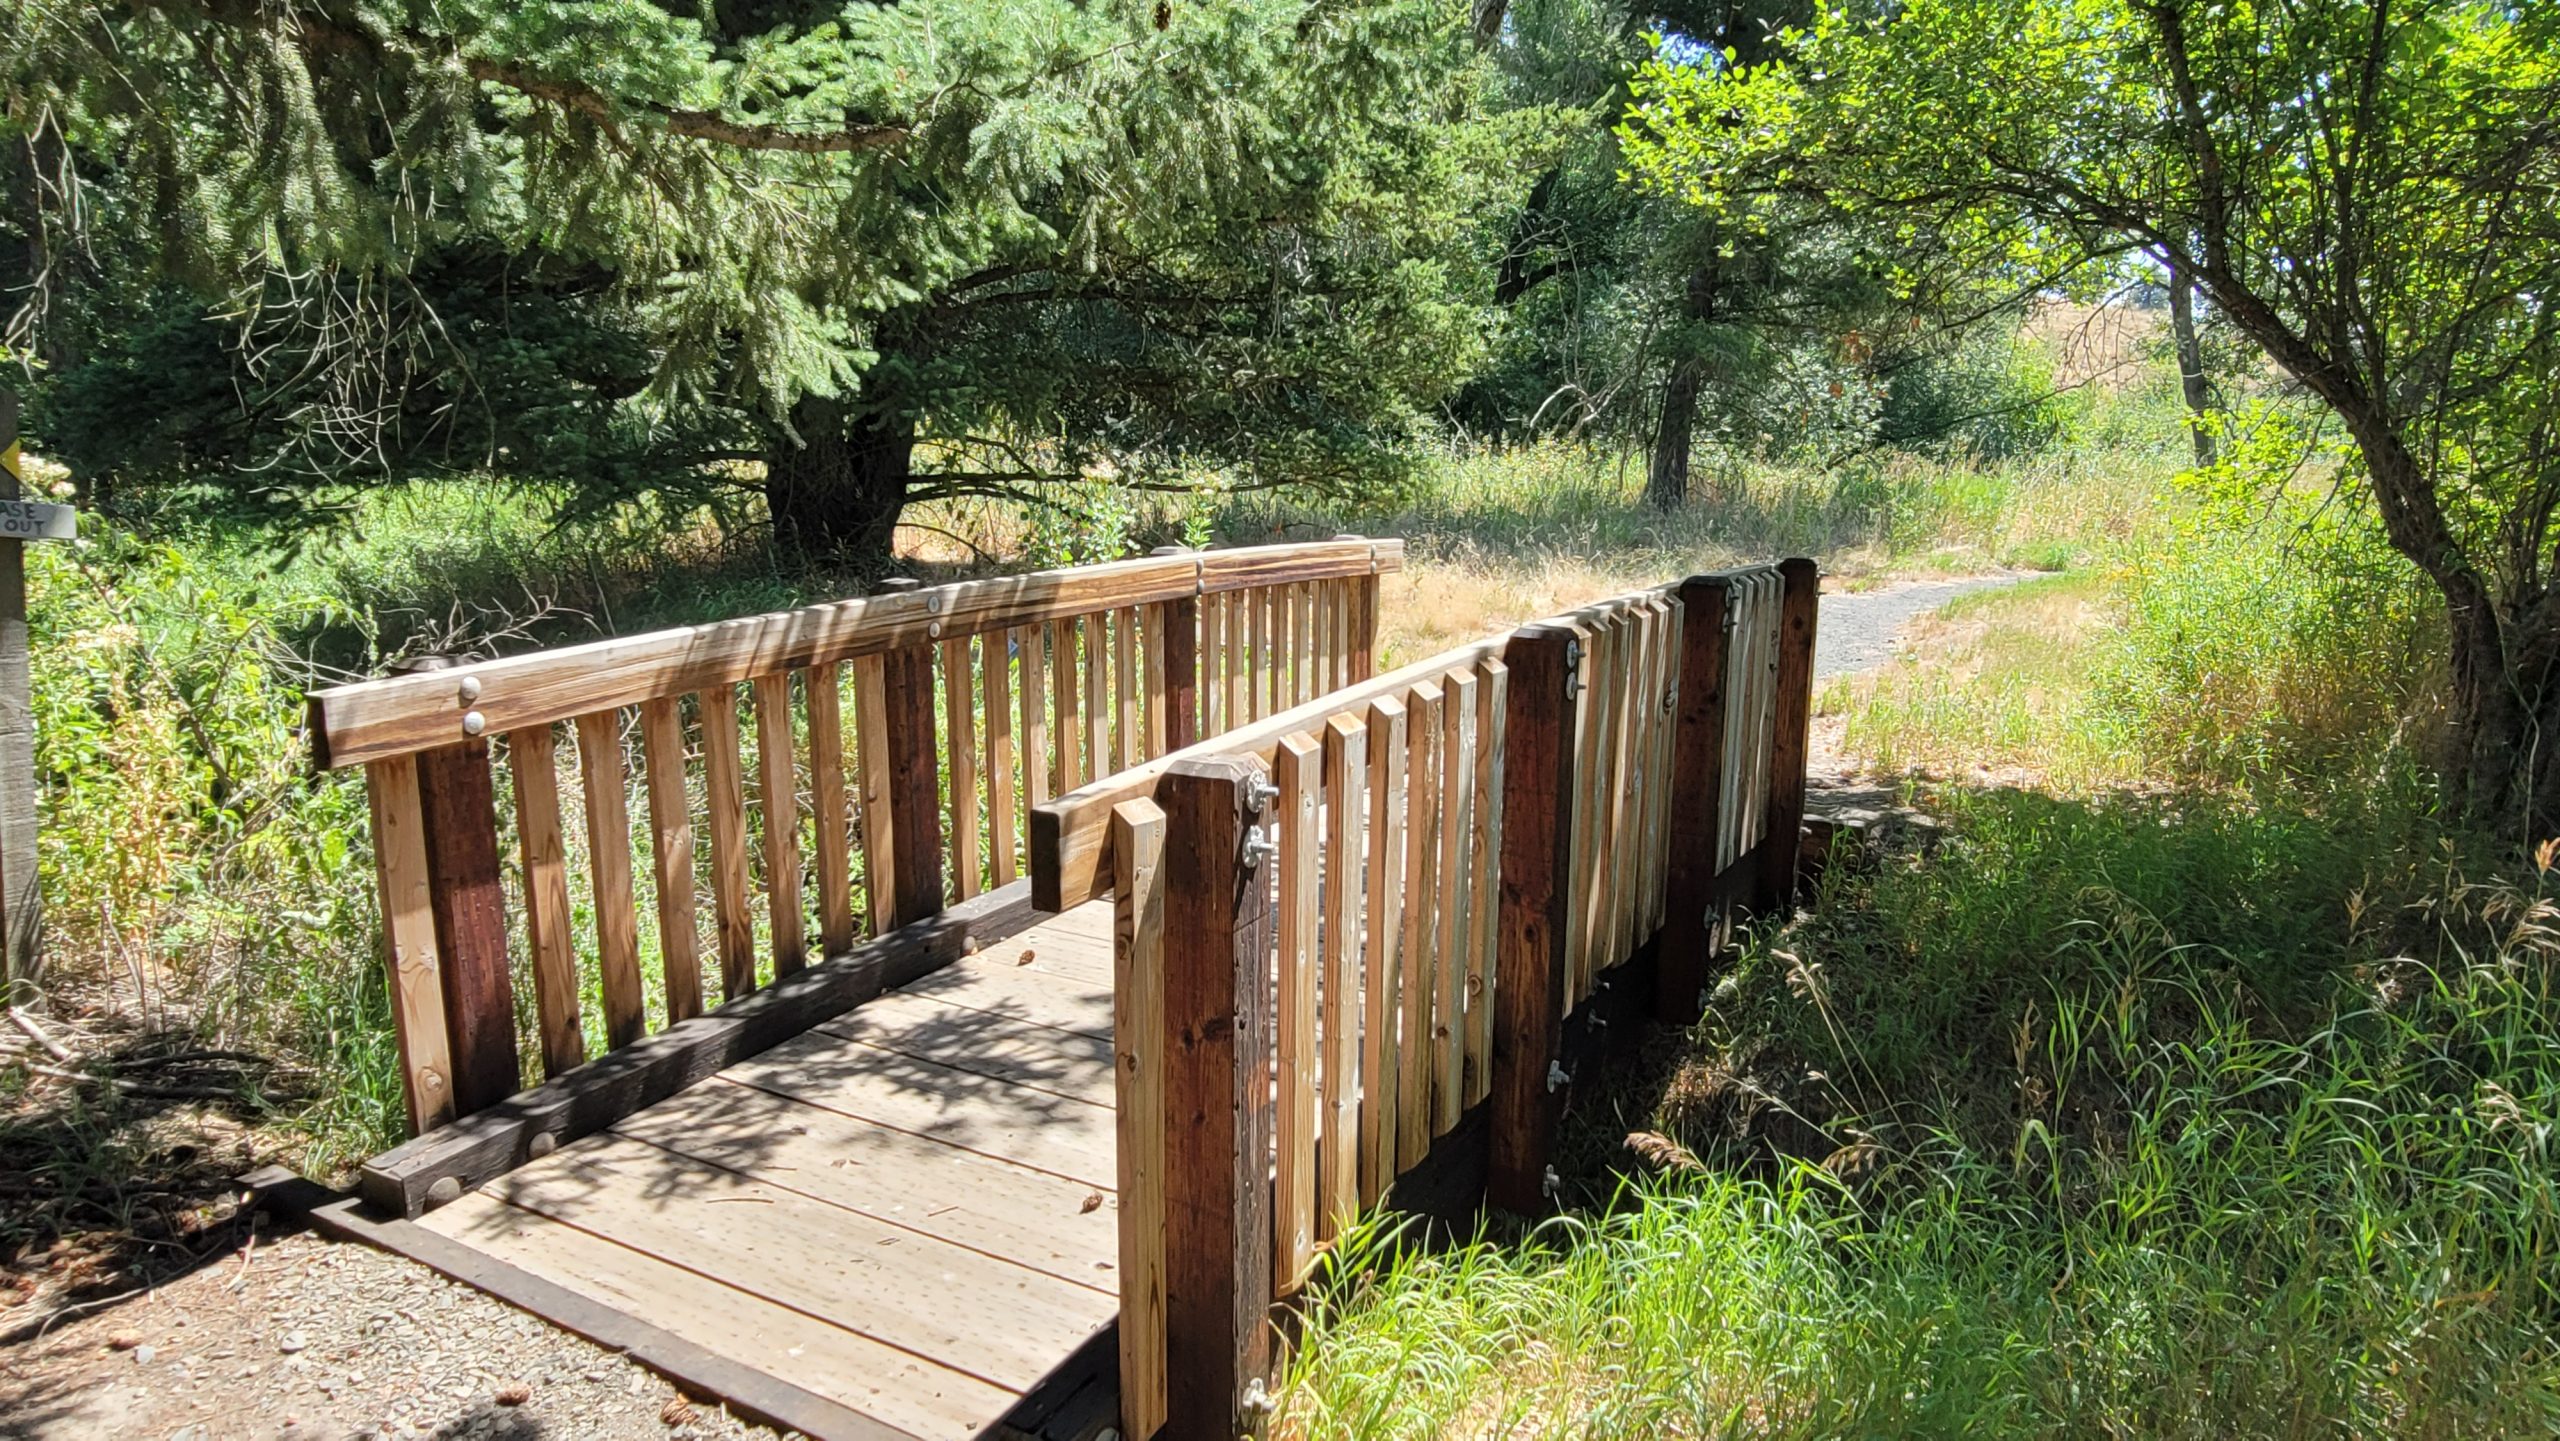 Another wooden bridge to help you savor the view of flourishing greens.